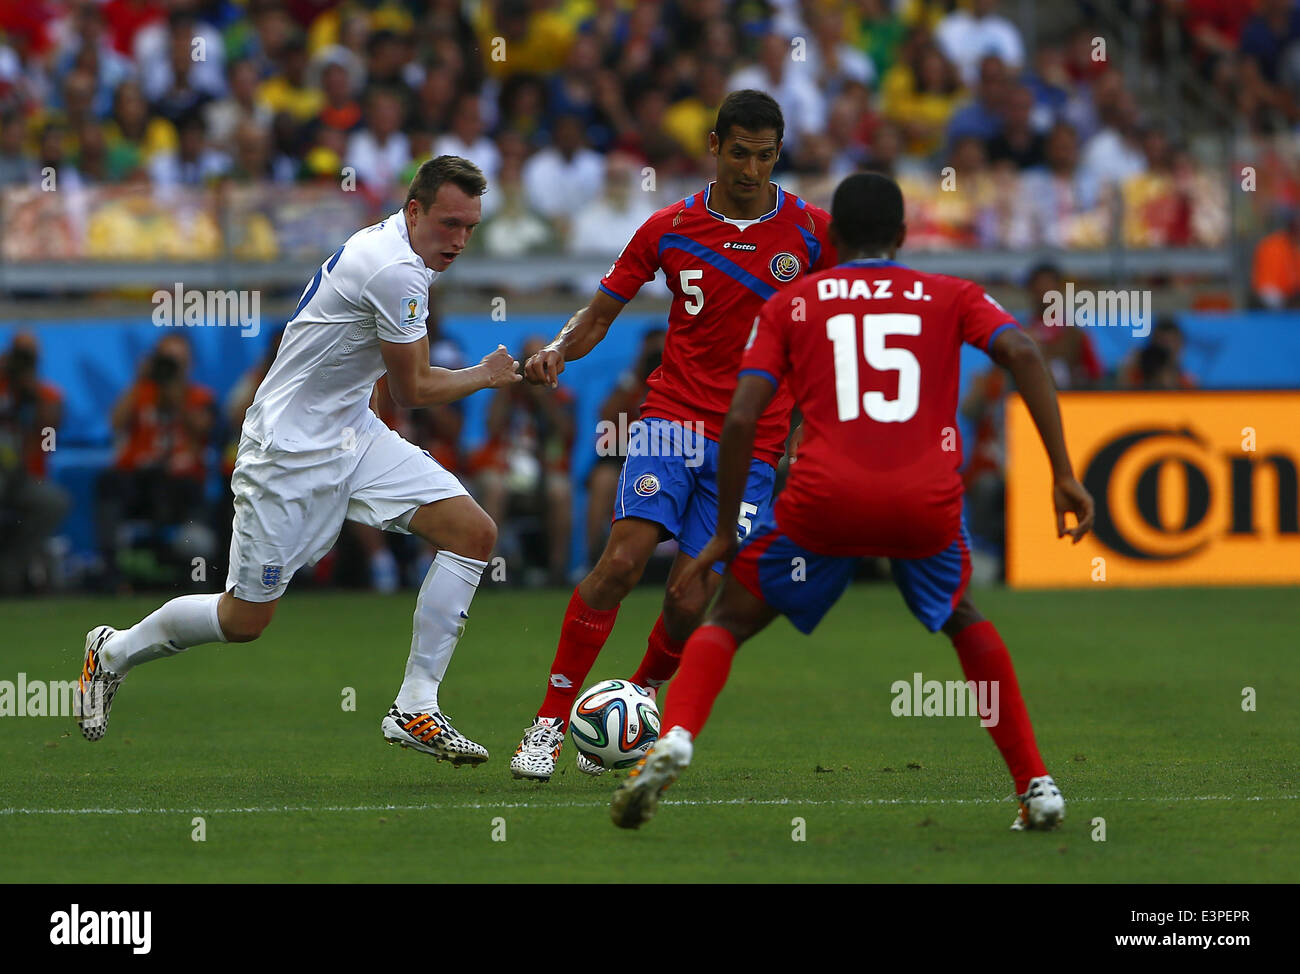 Belo Horizonte, Brazil. 24th June, 2014. Costa Rica's Celso Borges (C) controls the ball during a Group D match between Costa Rica and England of 2014 FIFA World Cup at the Estadio Mineirao Stadium in Belo Horizonte, Brazil, on June 24, 2014. © Liu Bin/Xinhua/Alamy Live News Stock Photo